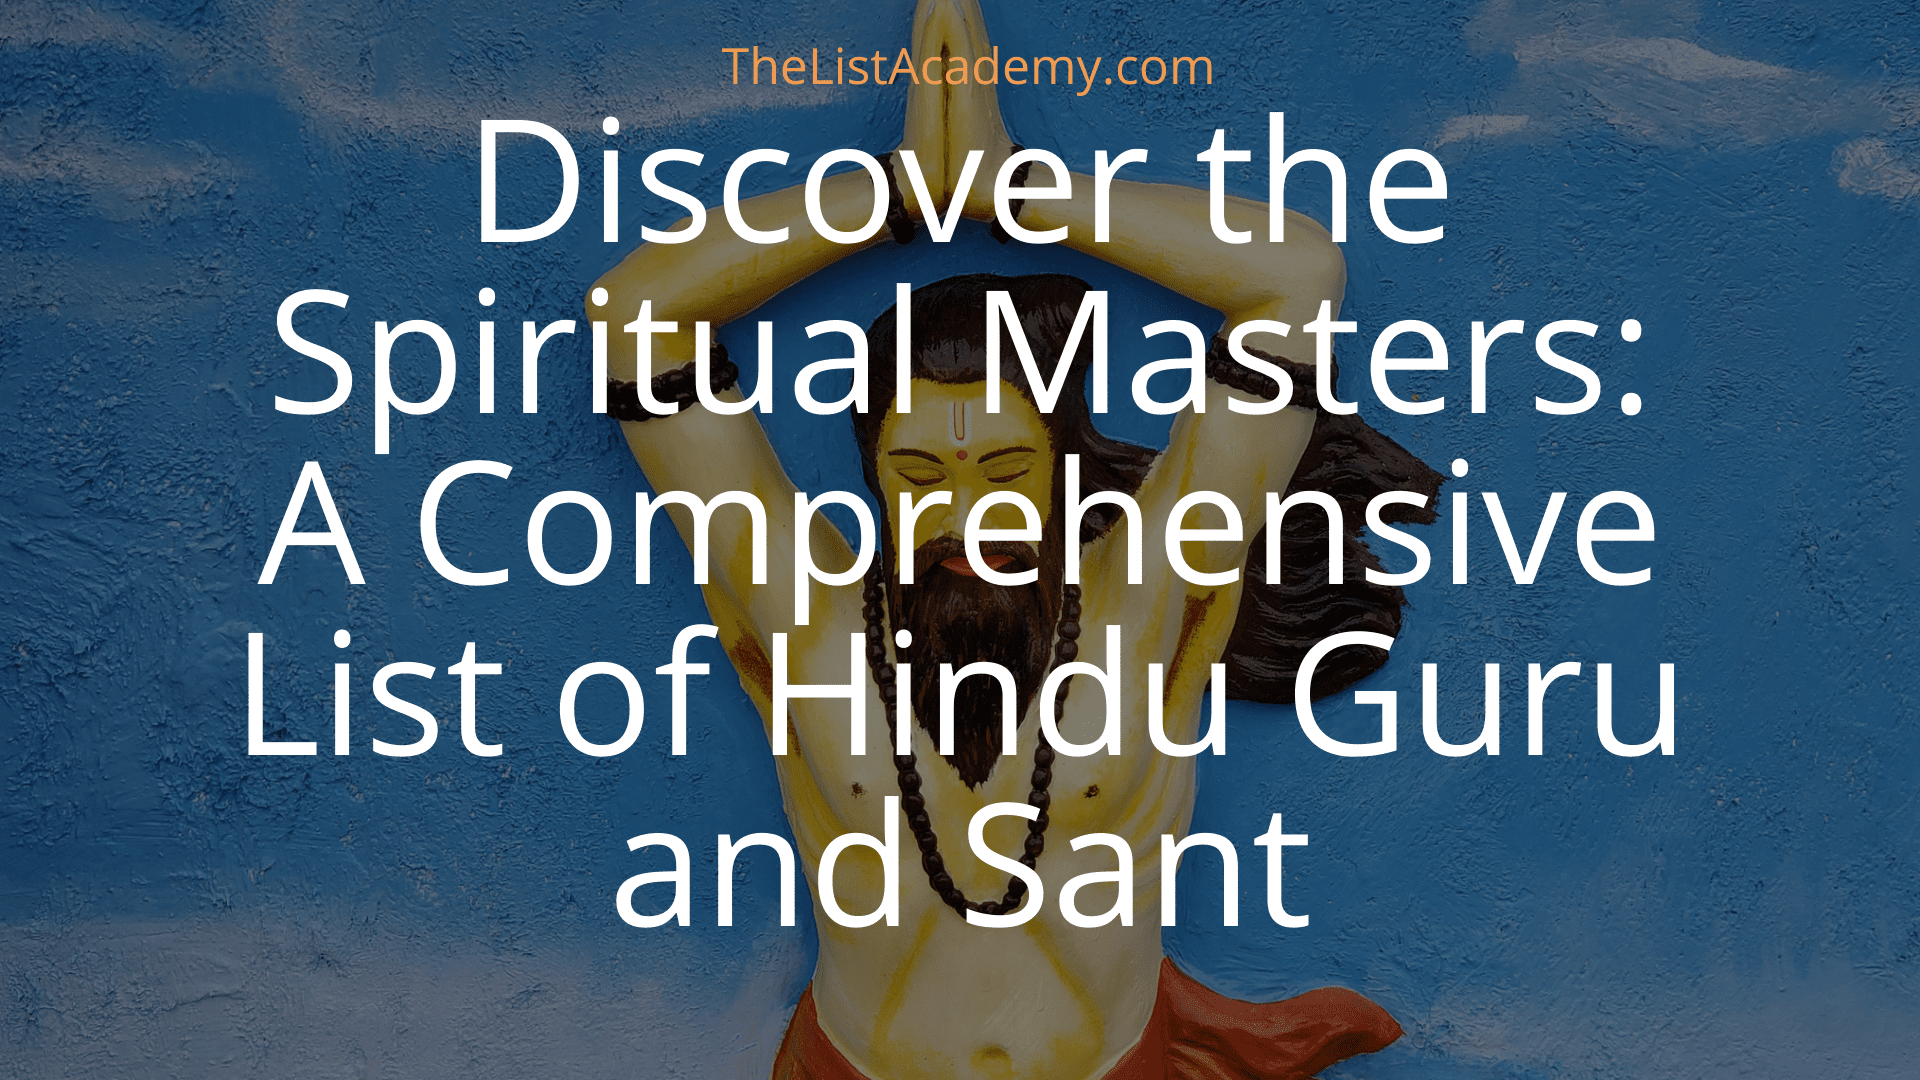 Cover Image For List : Discover The Spiritual Masters: A Comprehensive List Of Hindu Gurus And Saints